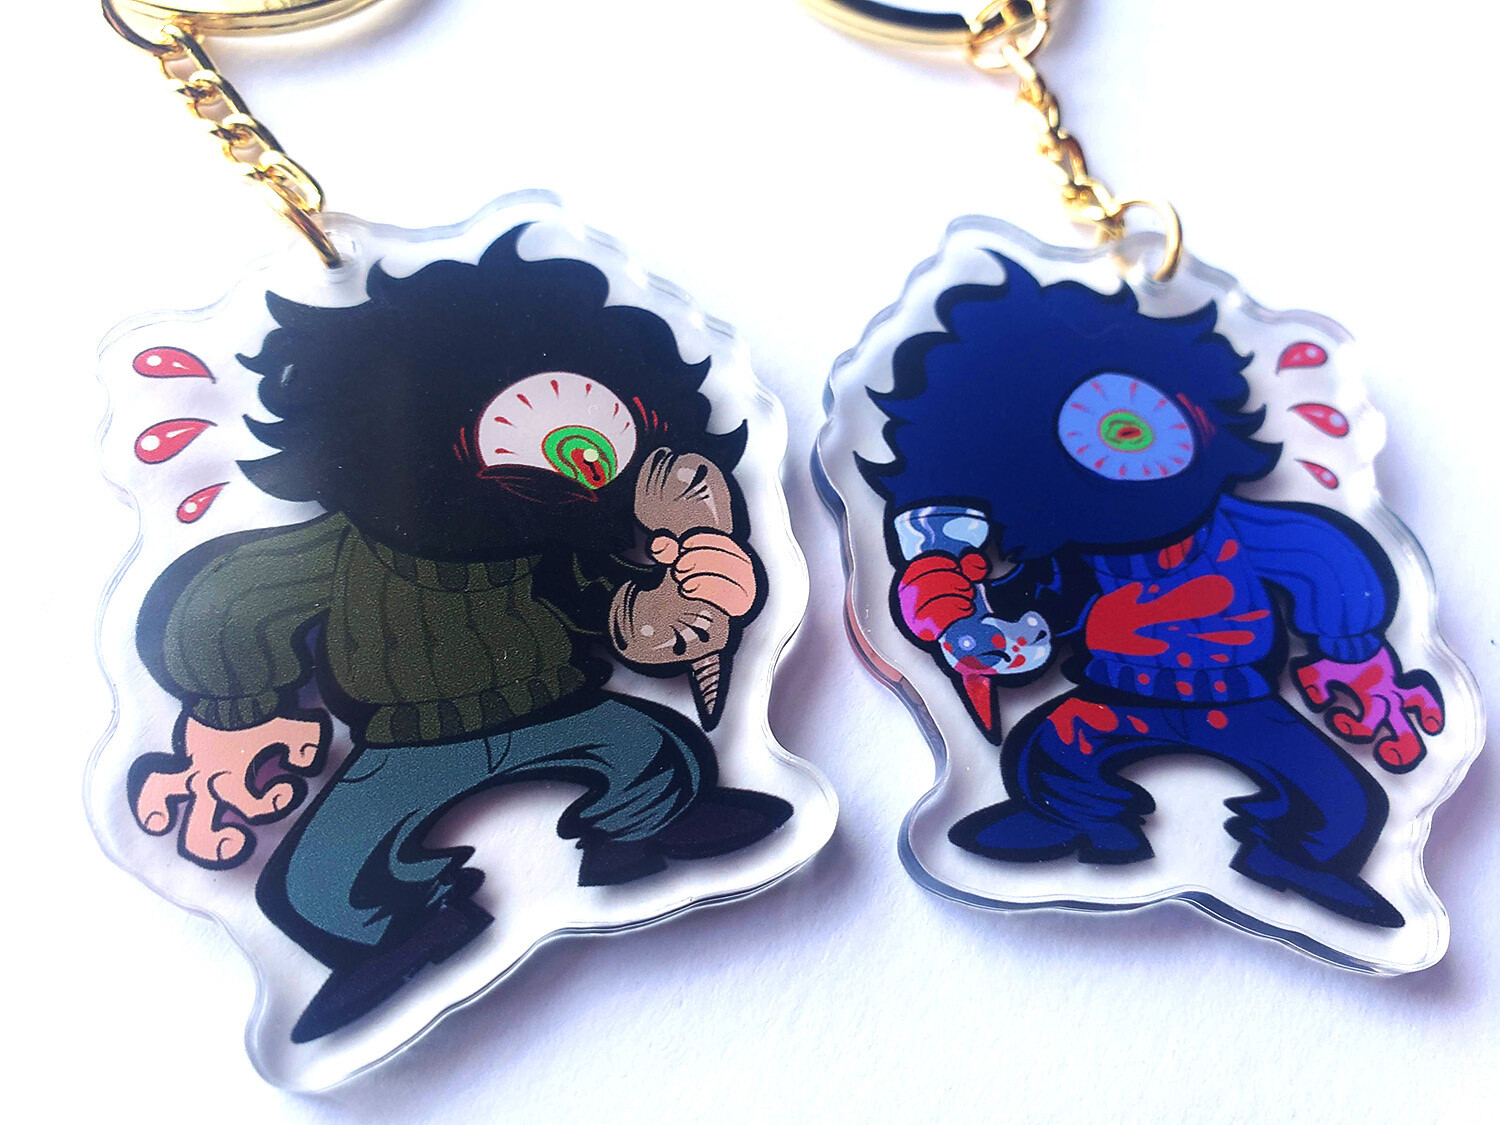 Billy Lenz (The Moaner) 2" acrylic charms!